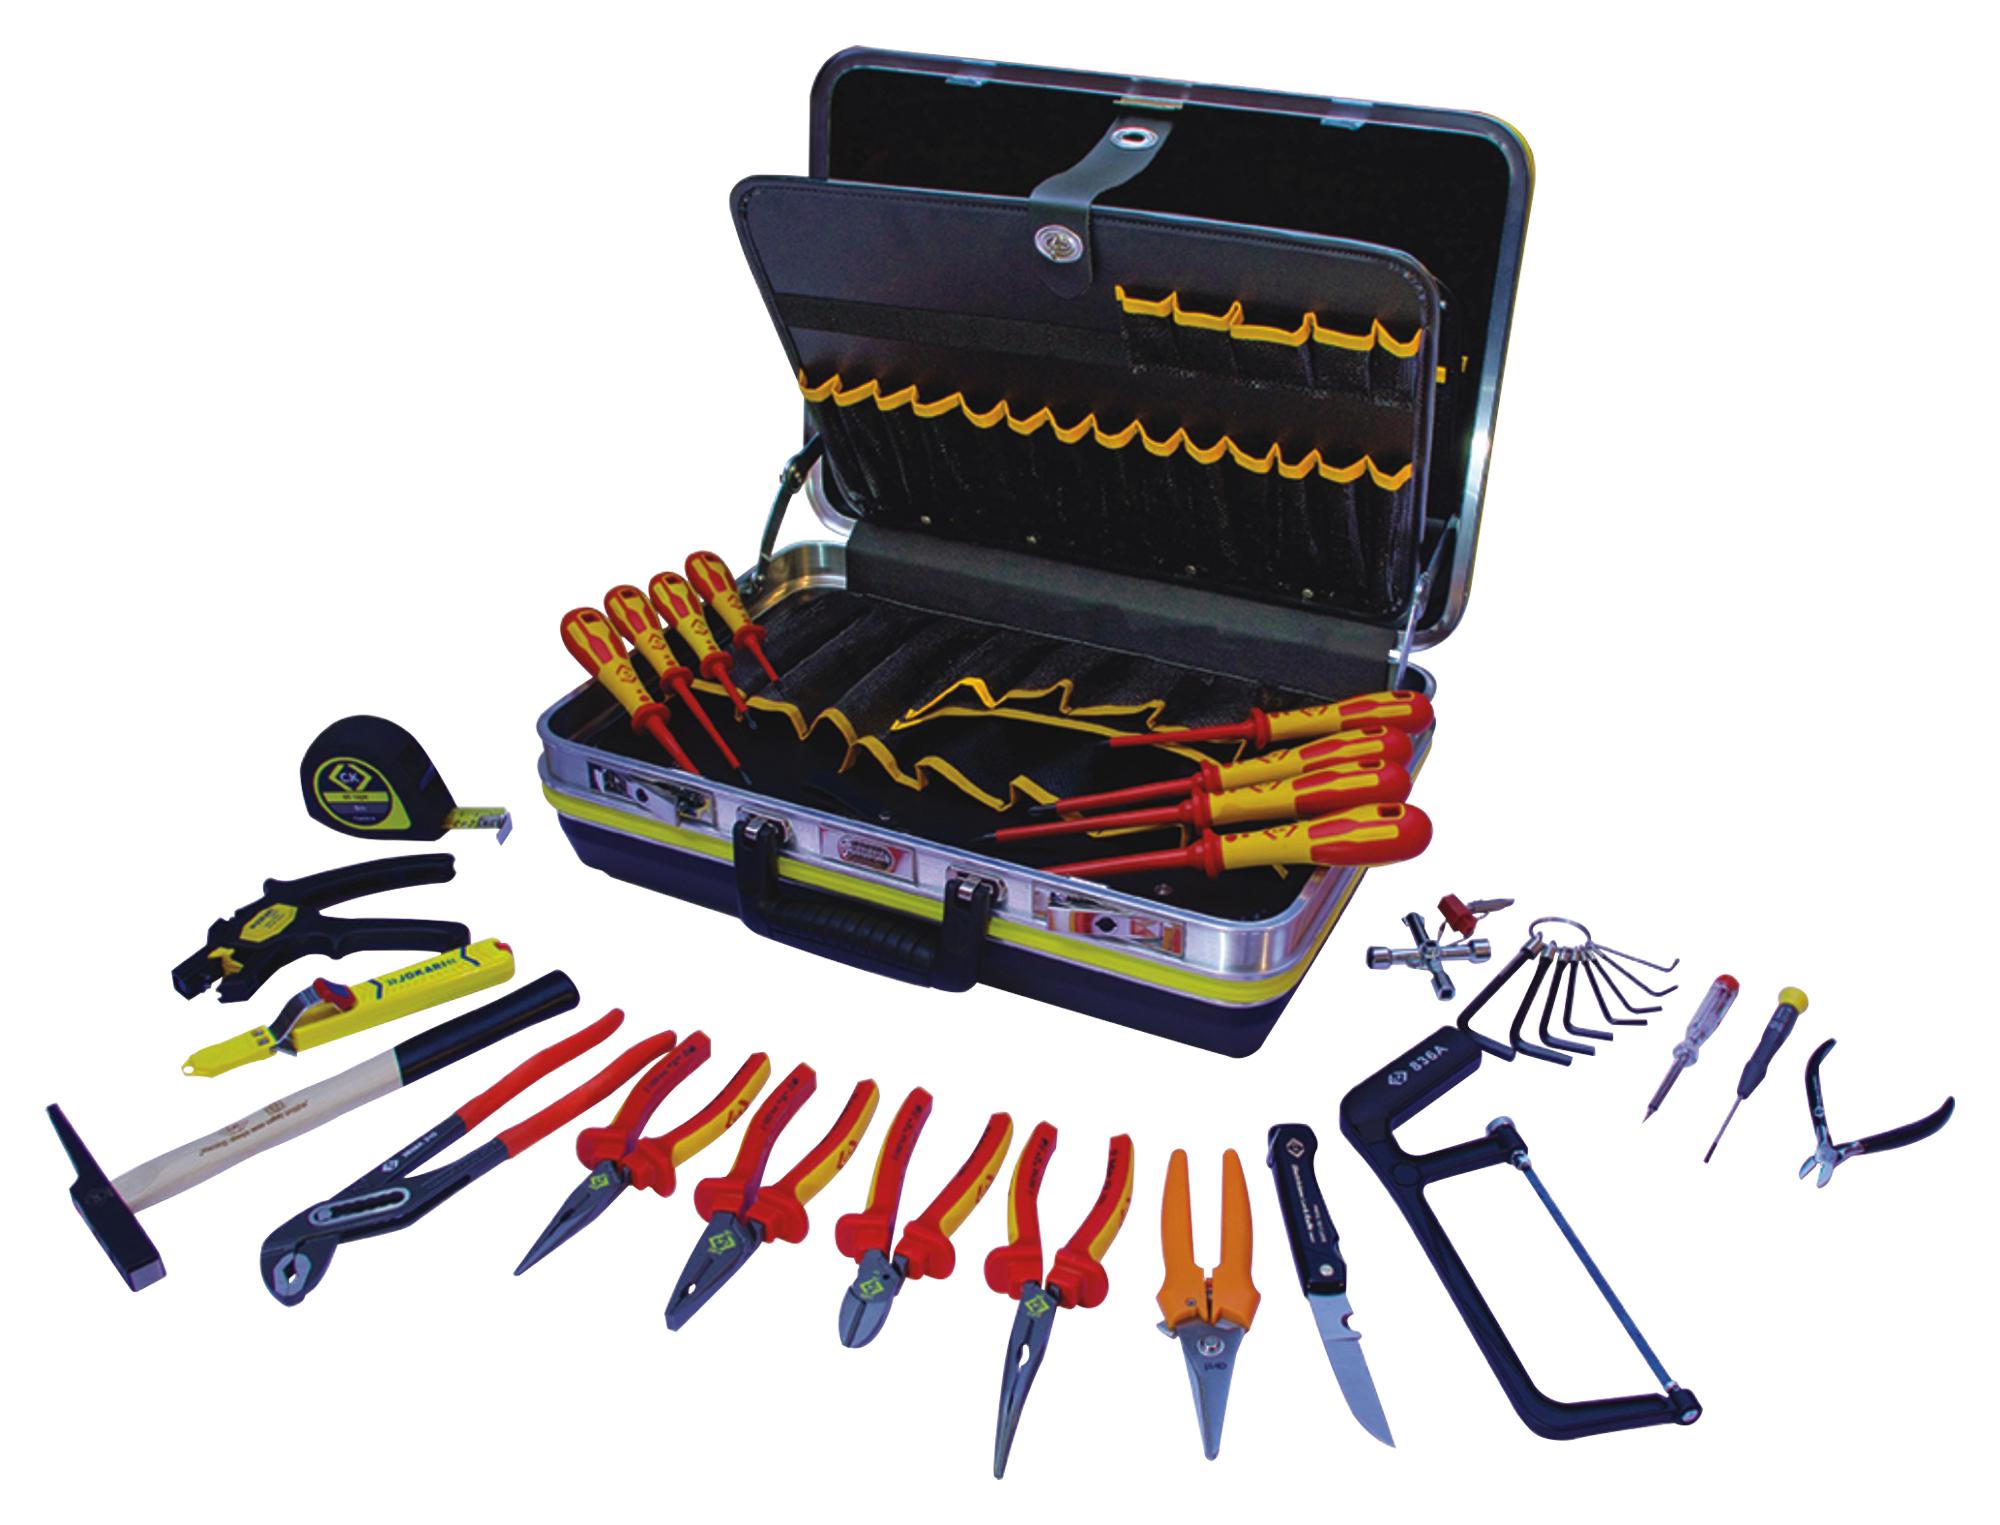 T1641 ELECTRICIAN SERVICE CASE KIT, 25PC CK TOOLS